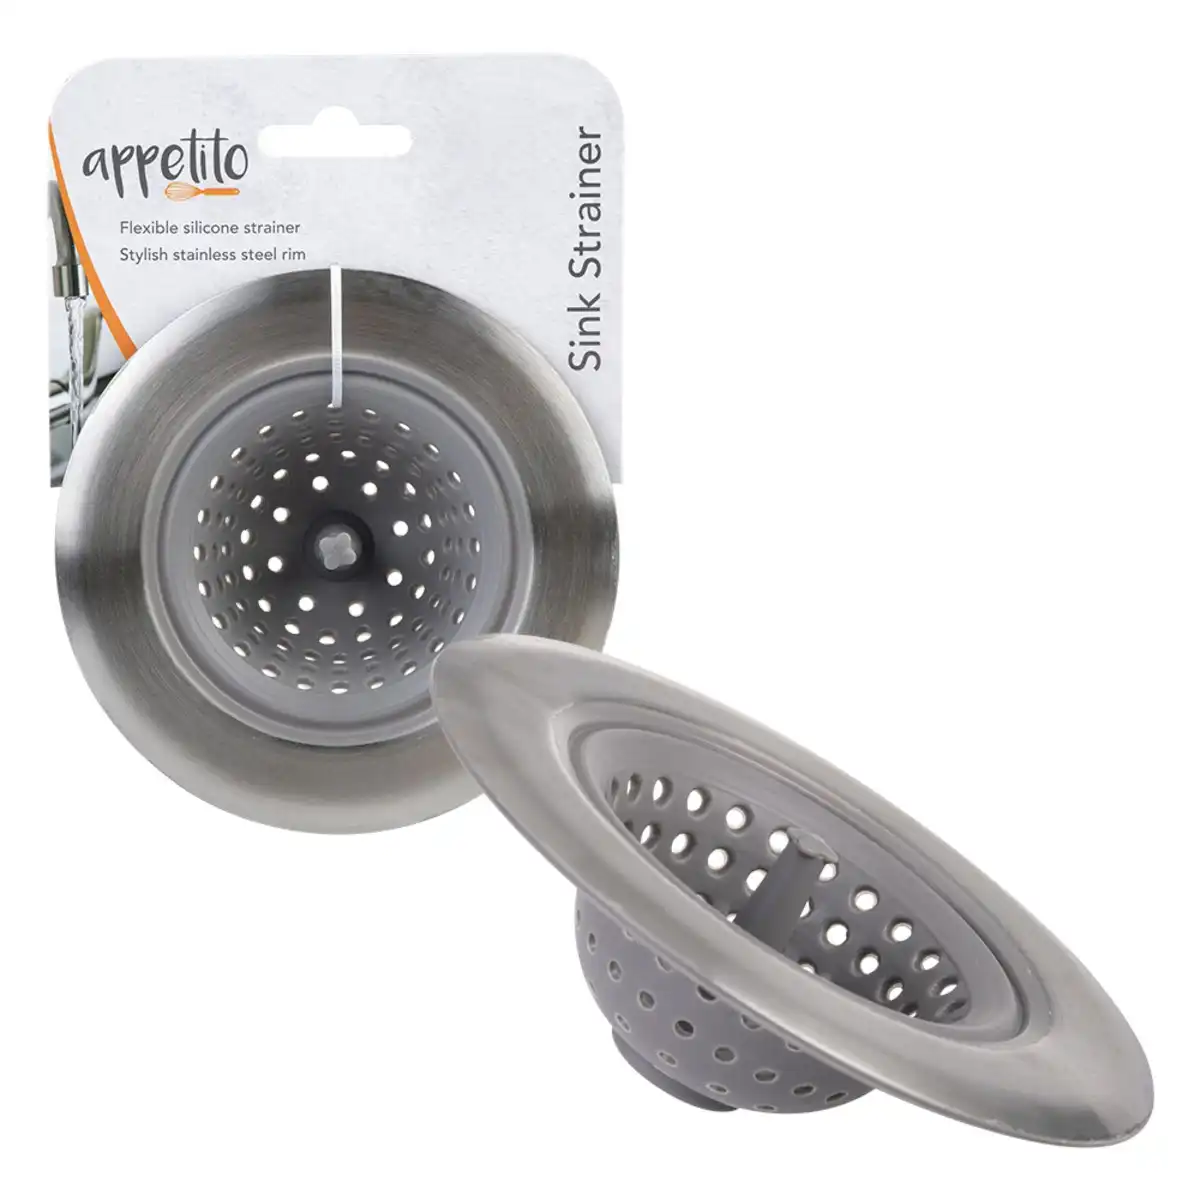 Appetito Stainless Steel & Silicone Sink Strainer